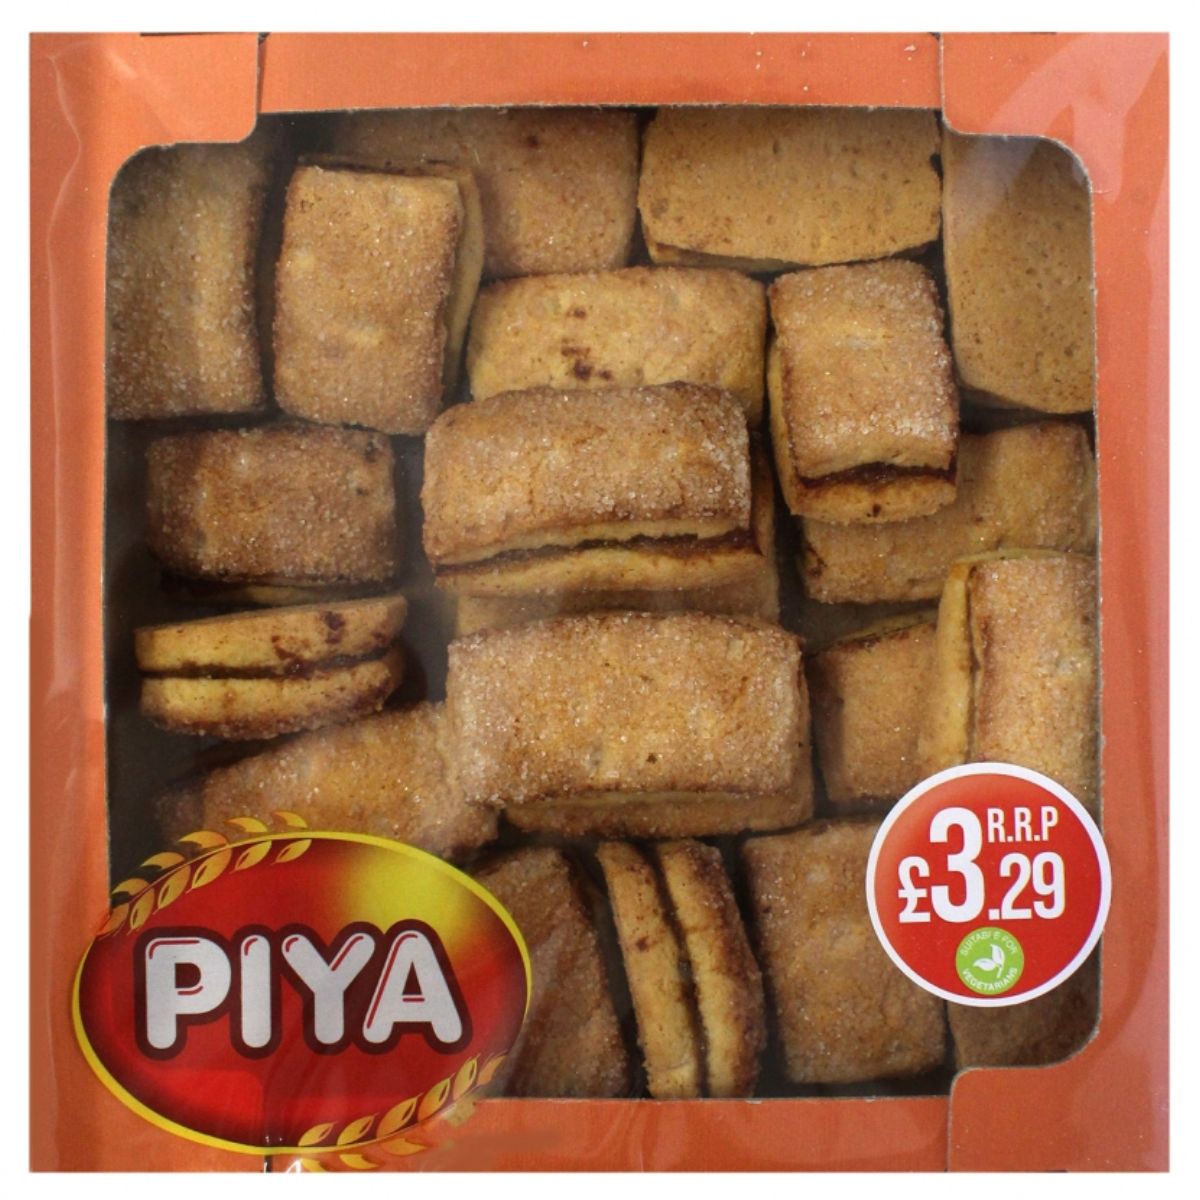 A box of Piya - Cookies Apple Pie - 400g on a white background.